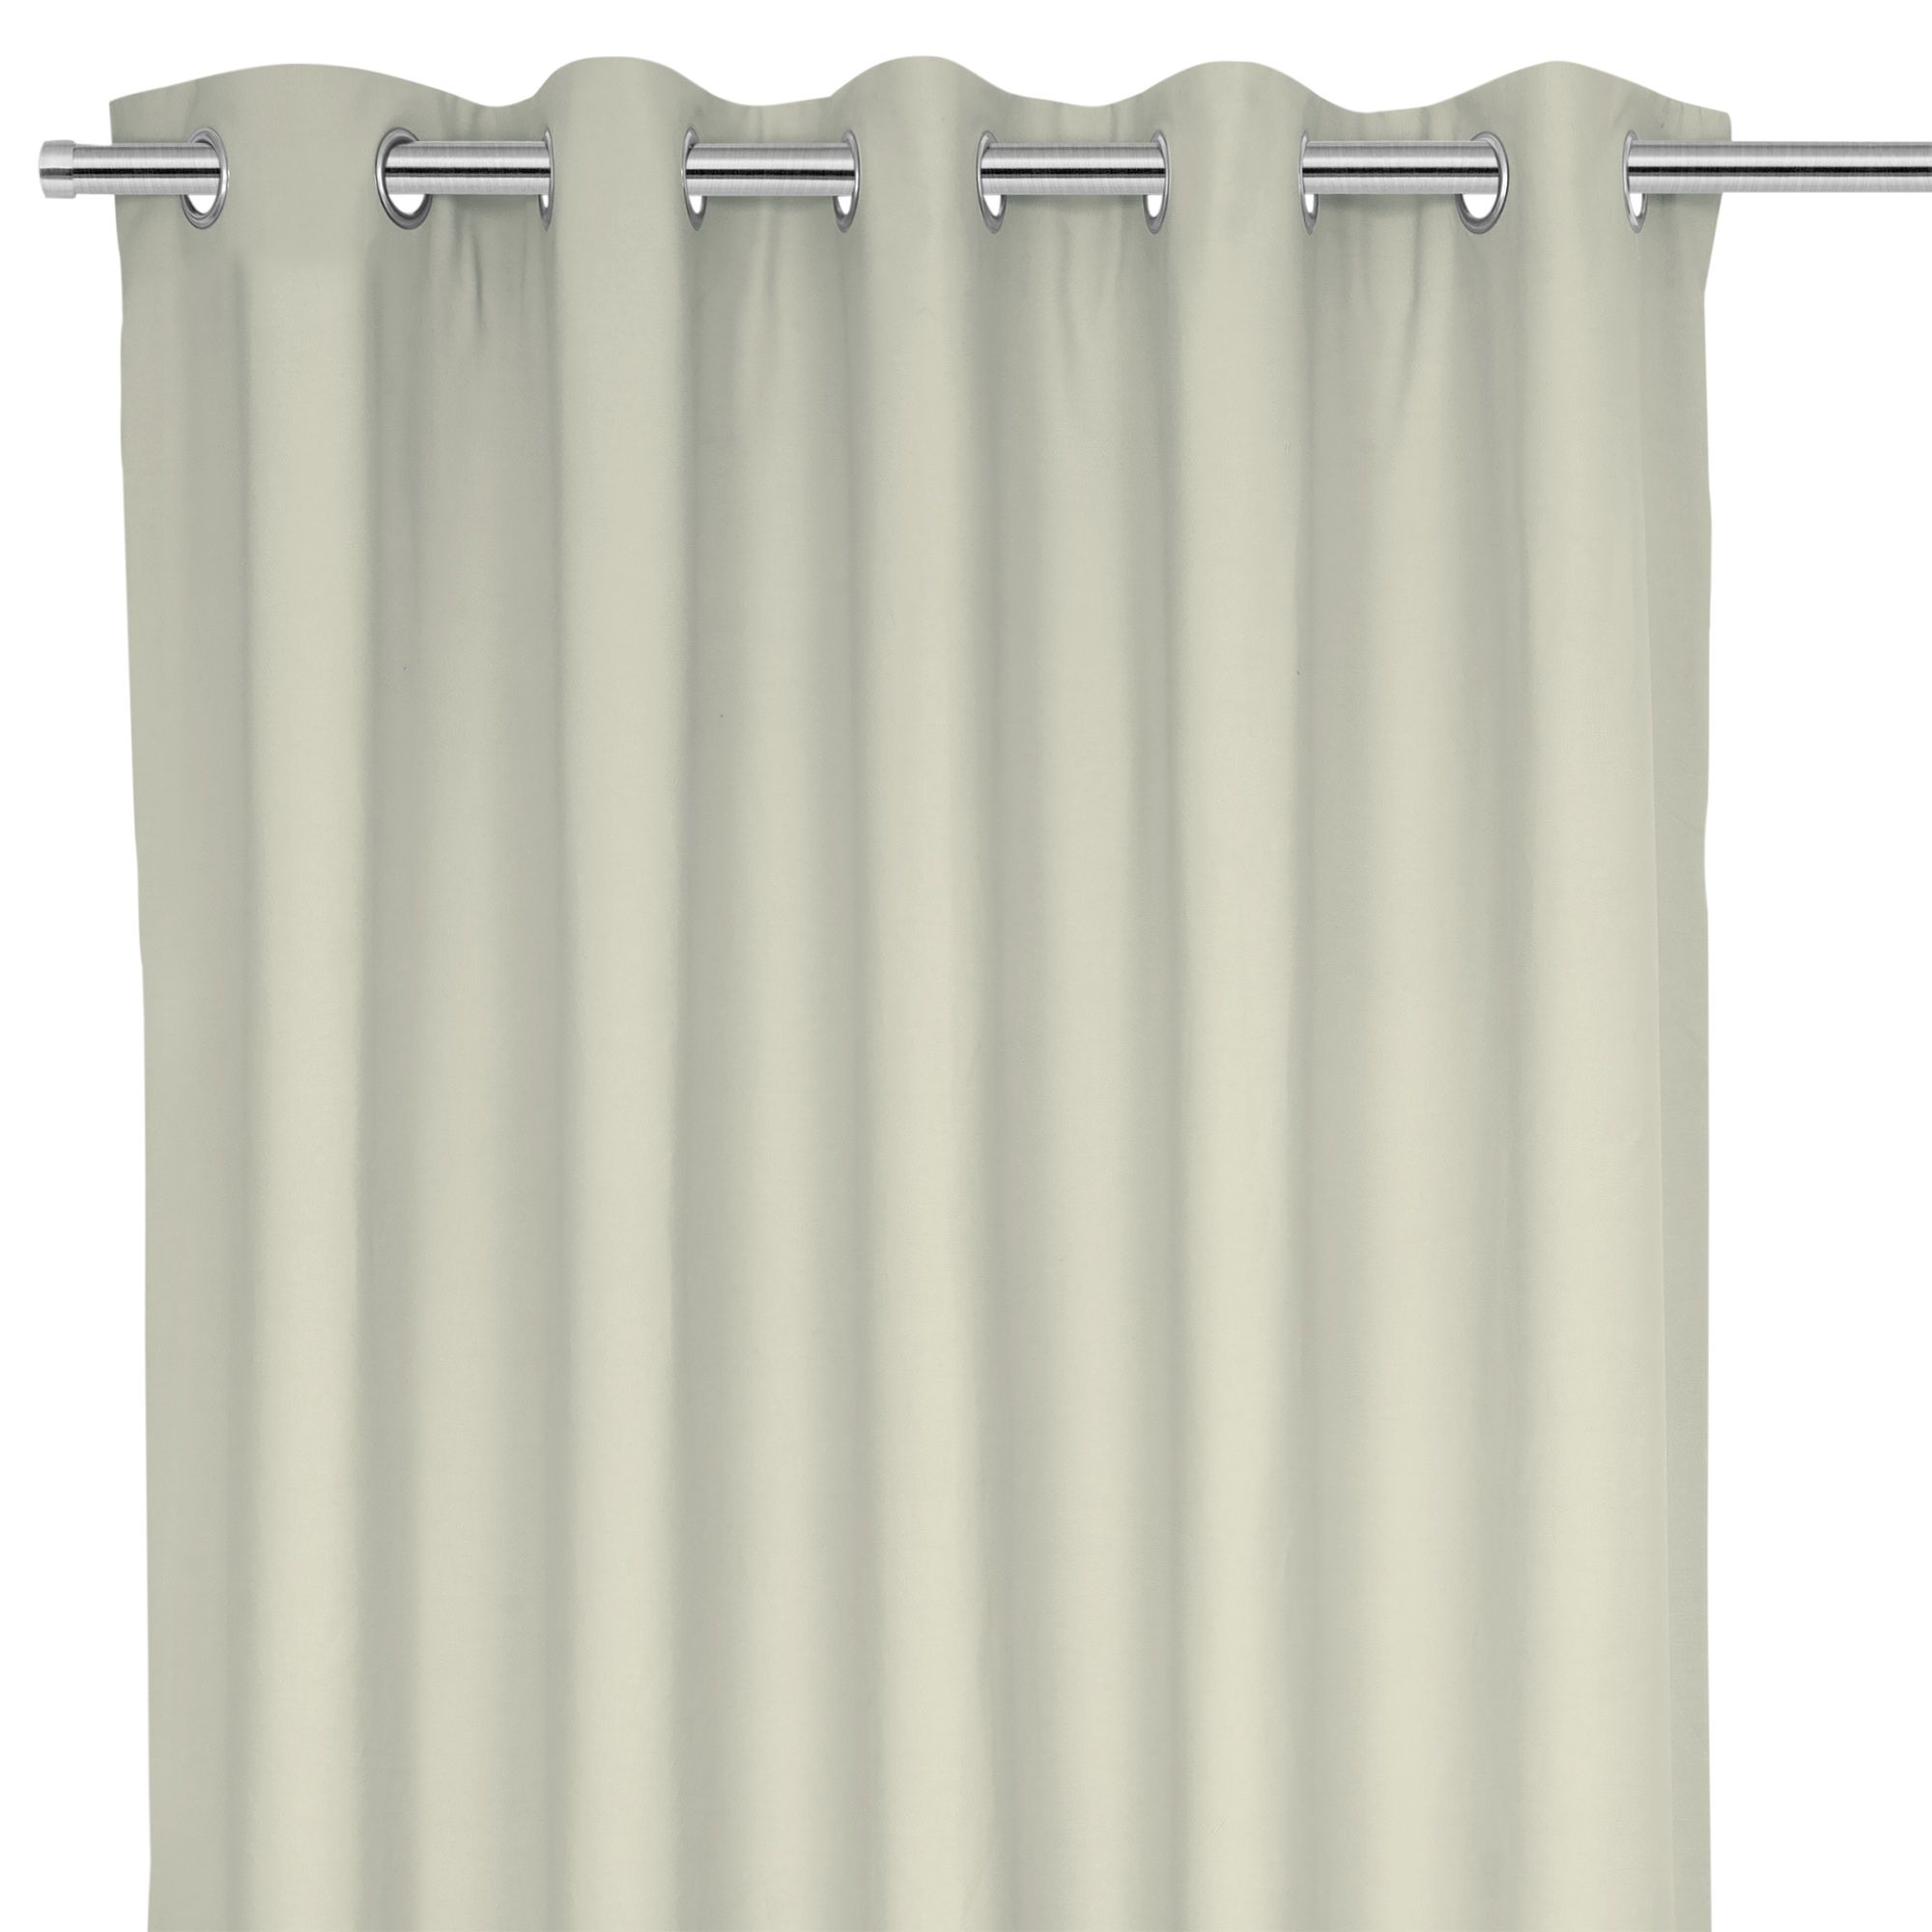 Hiva Beige Solid dyed Lined Eyelet Curtain (W)167cm (L)183cm, Pair